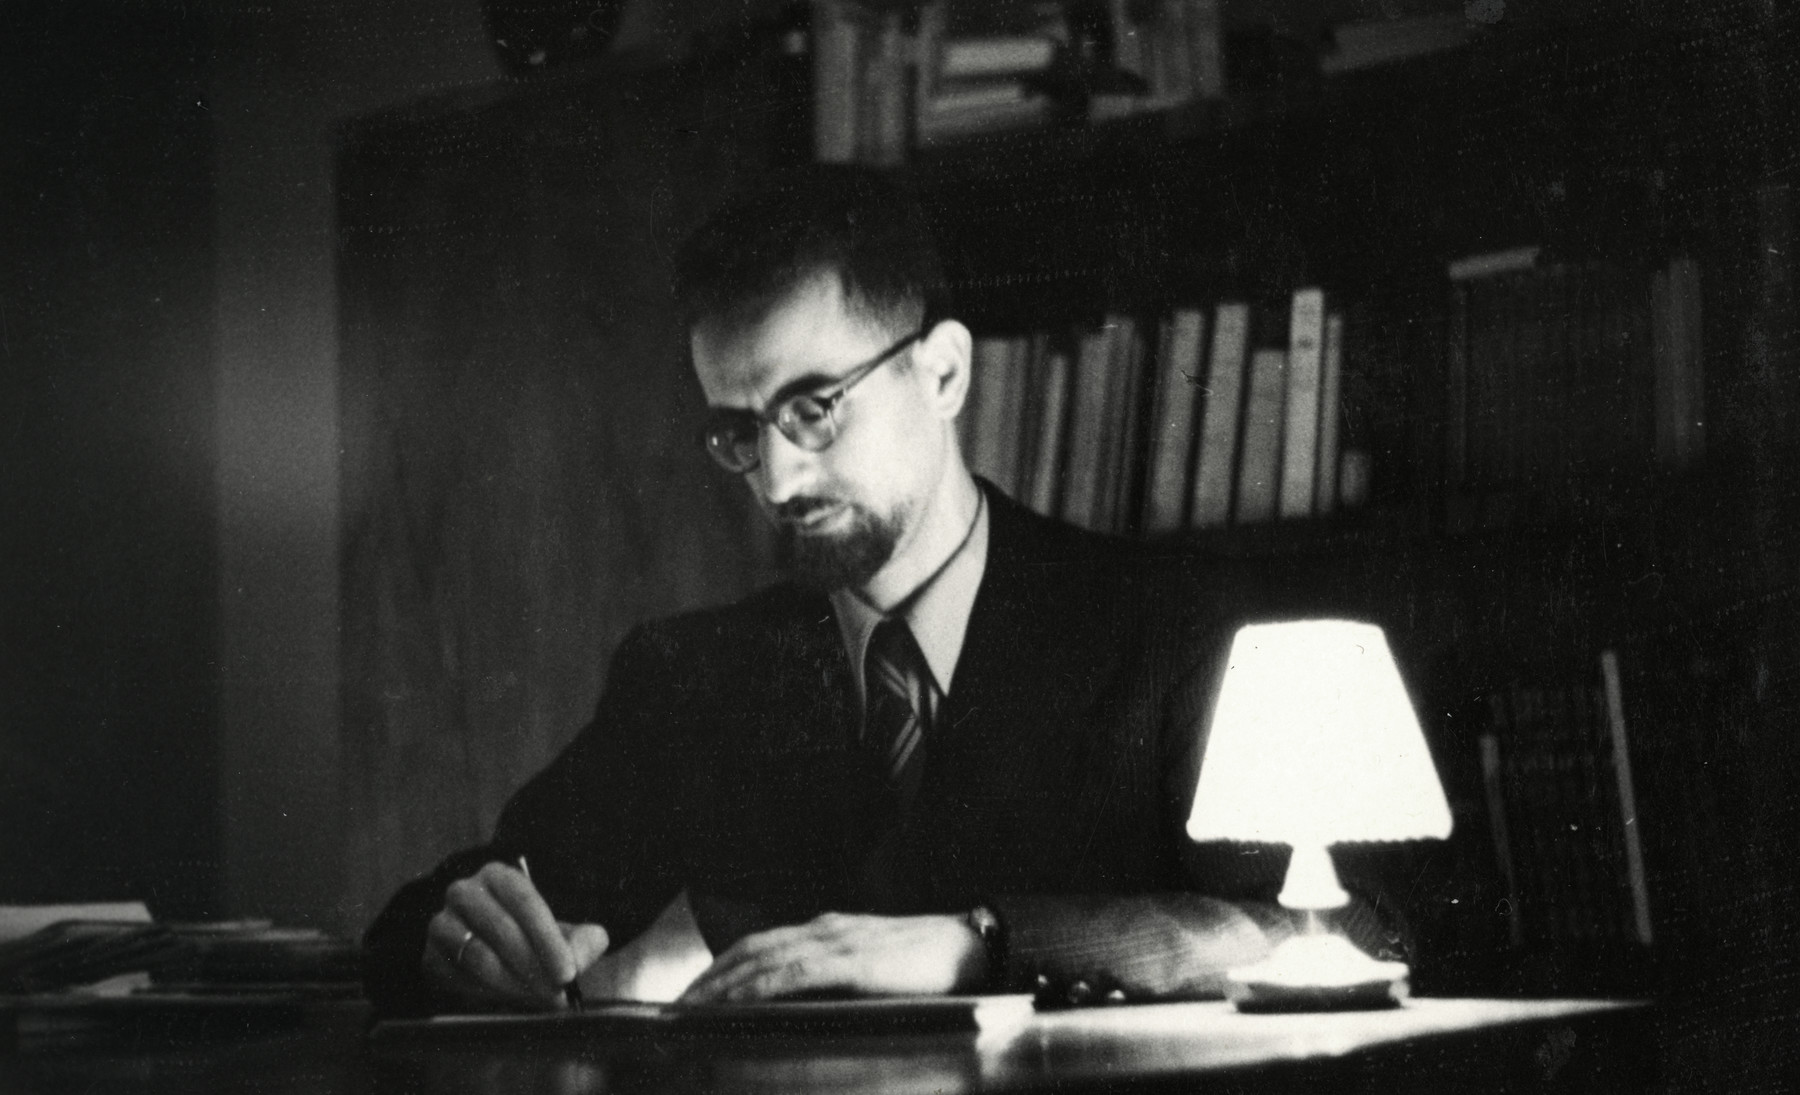 Shaul Nissim writes at his desk in Trieste.